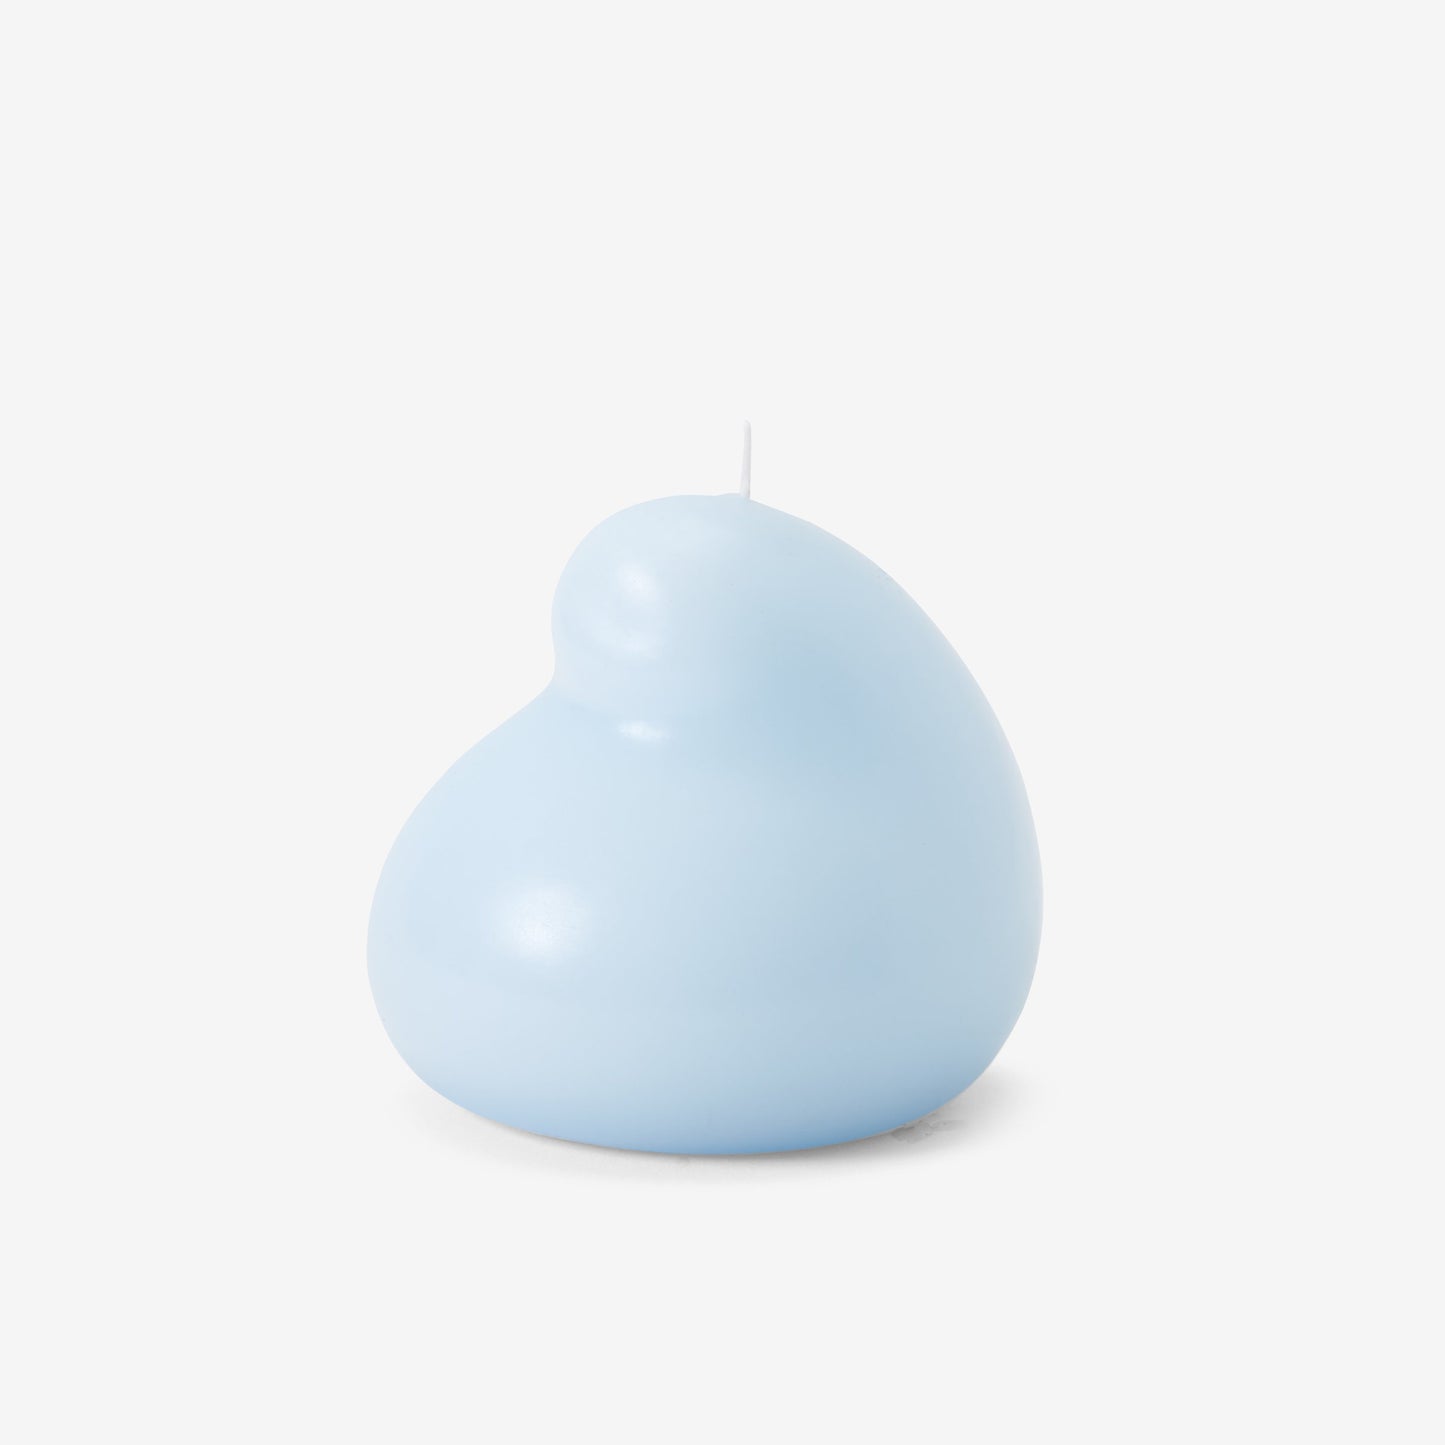 Areaware goober candle in blue with organic blobby shape and single wick